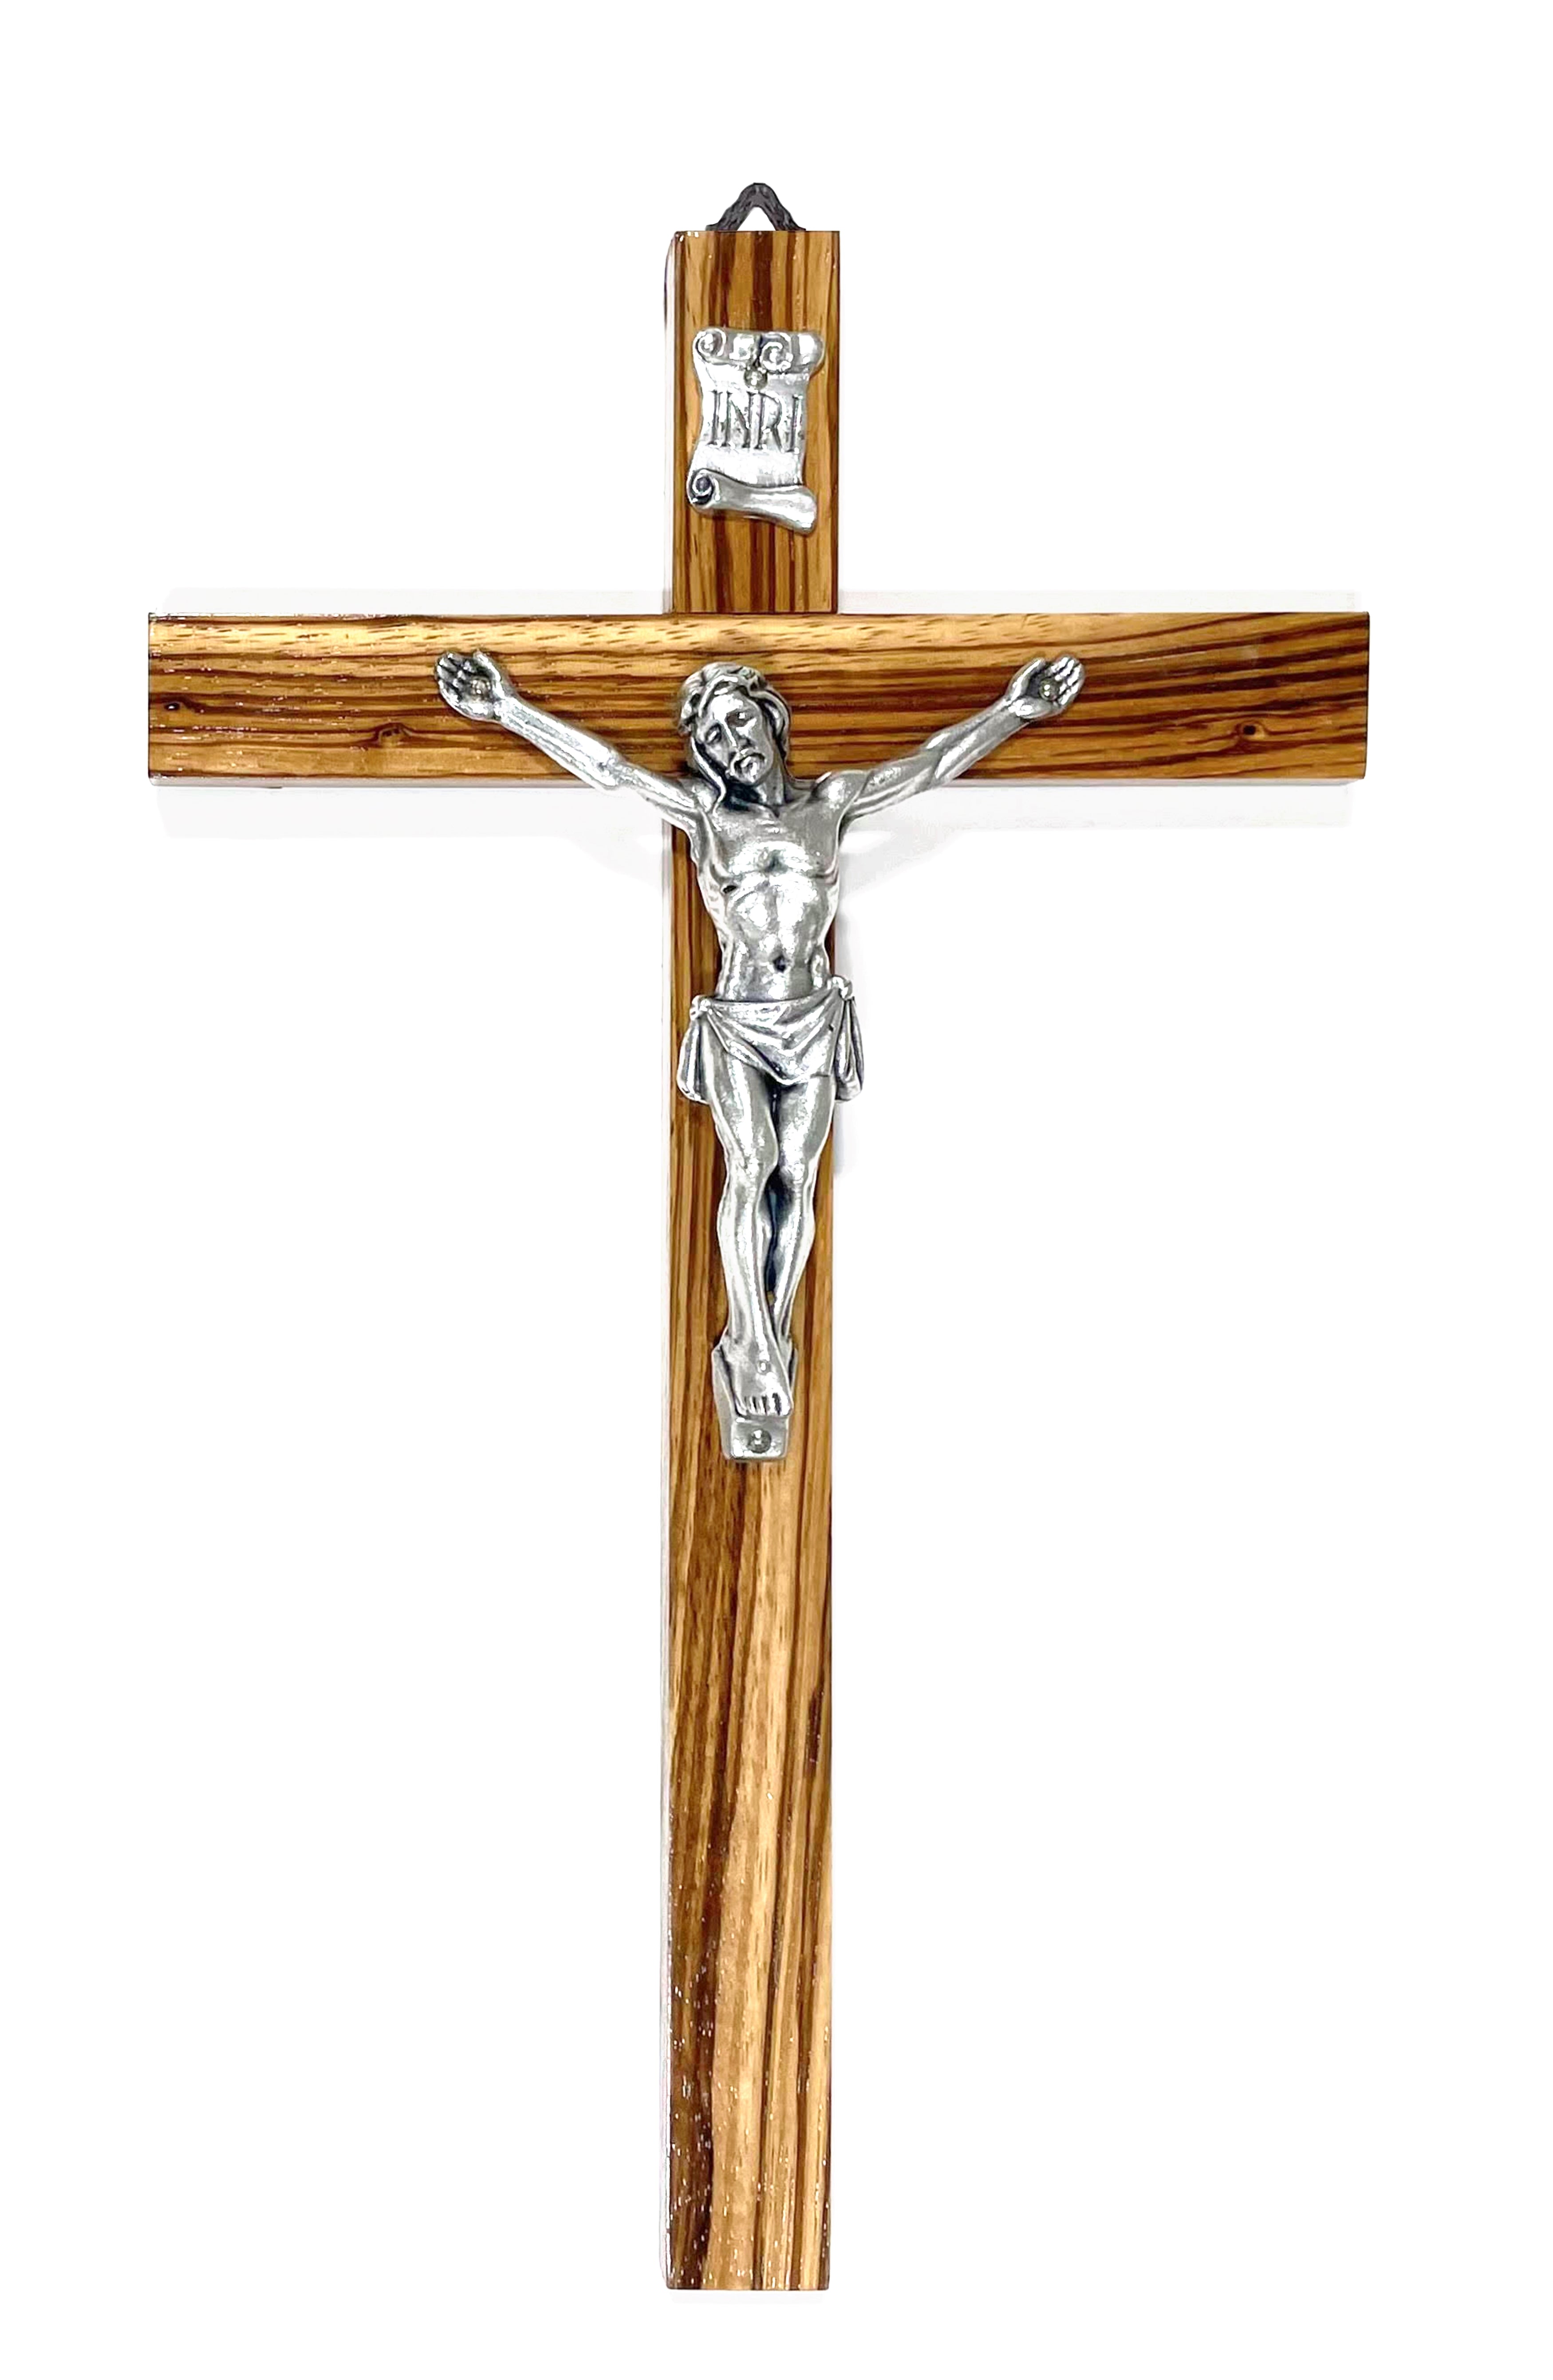 Rustic wooden crucifix with silver metal body